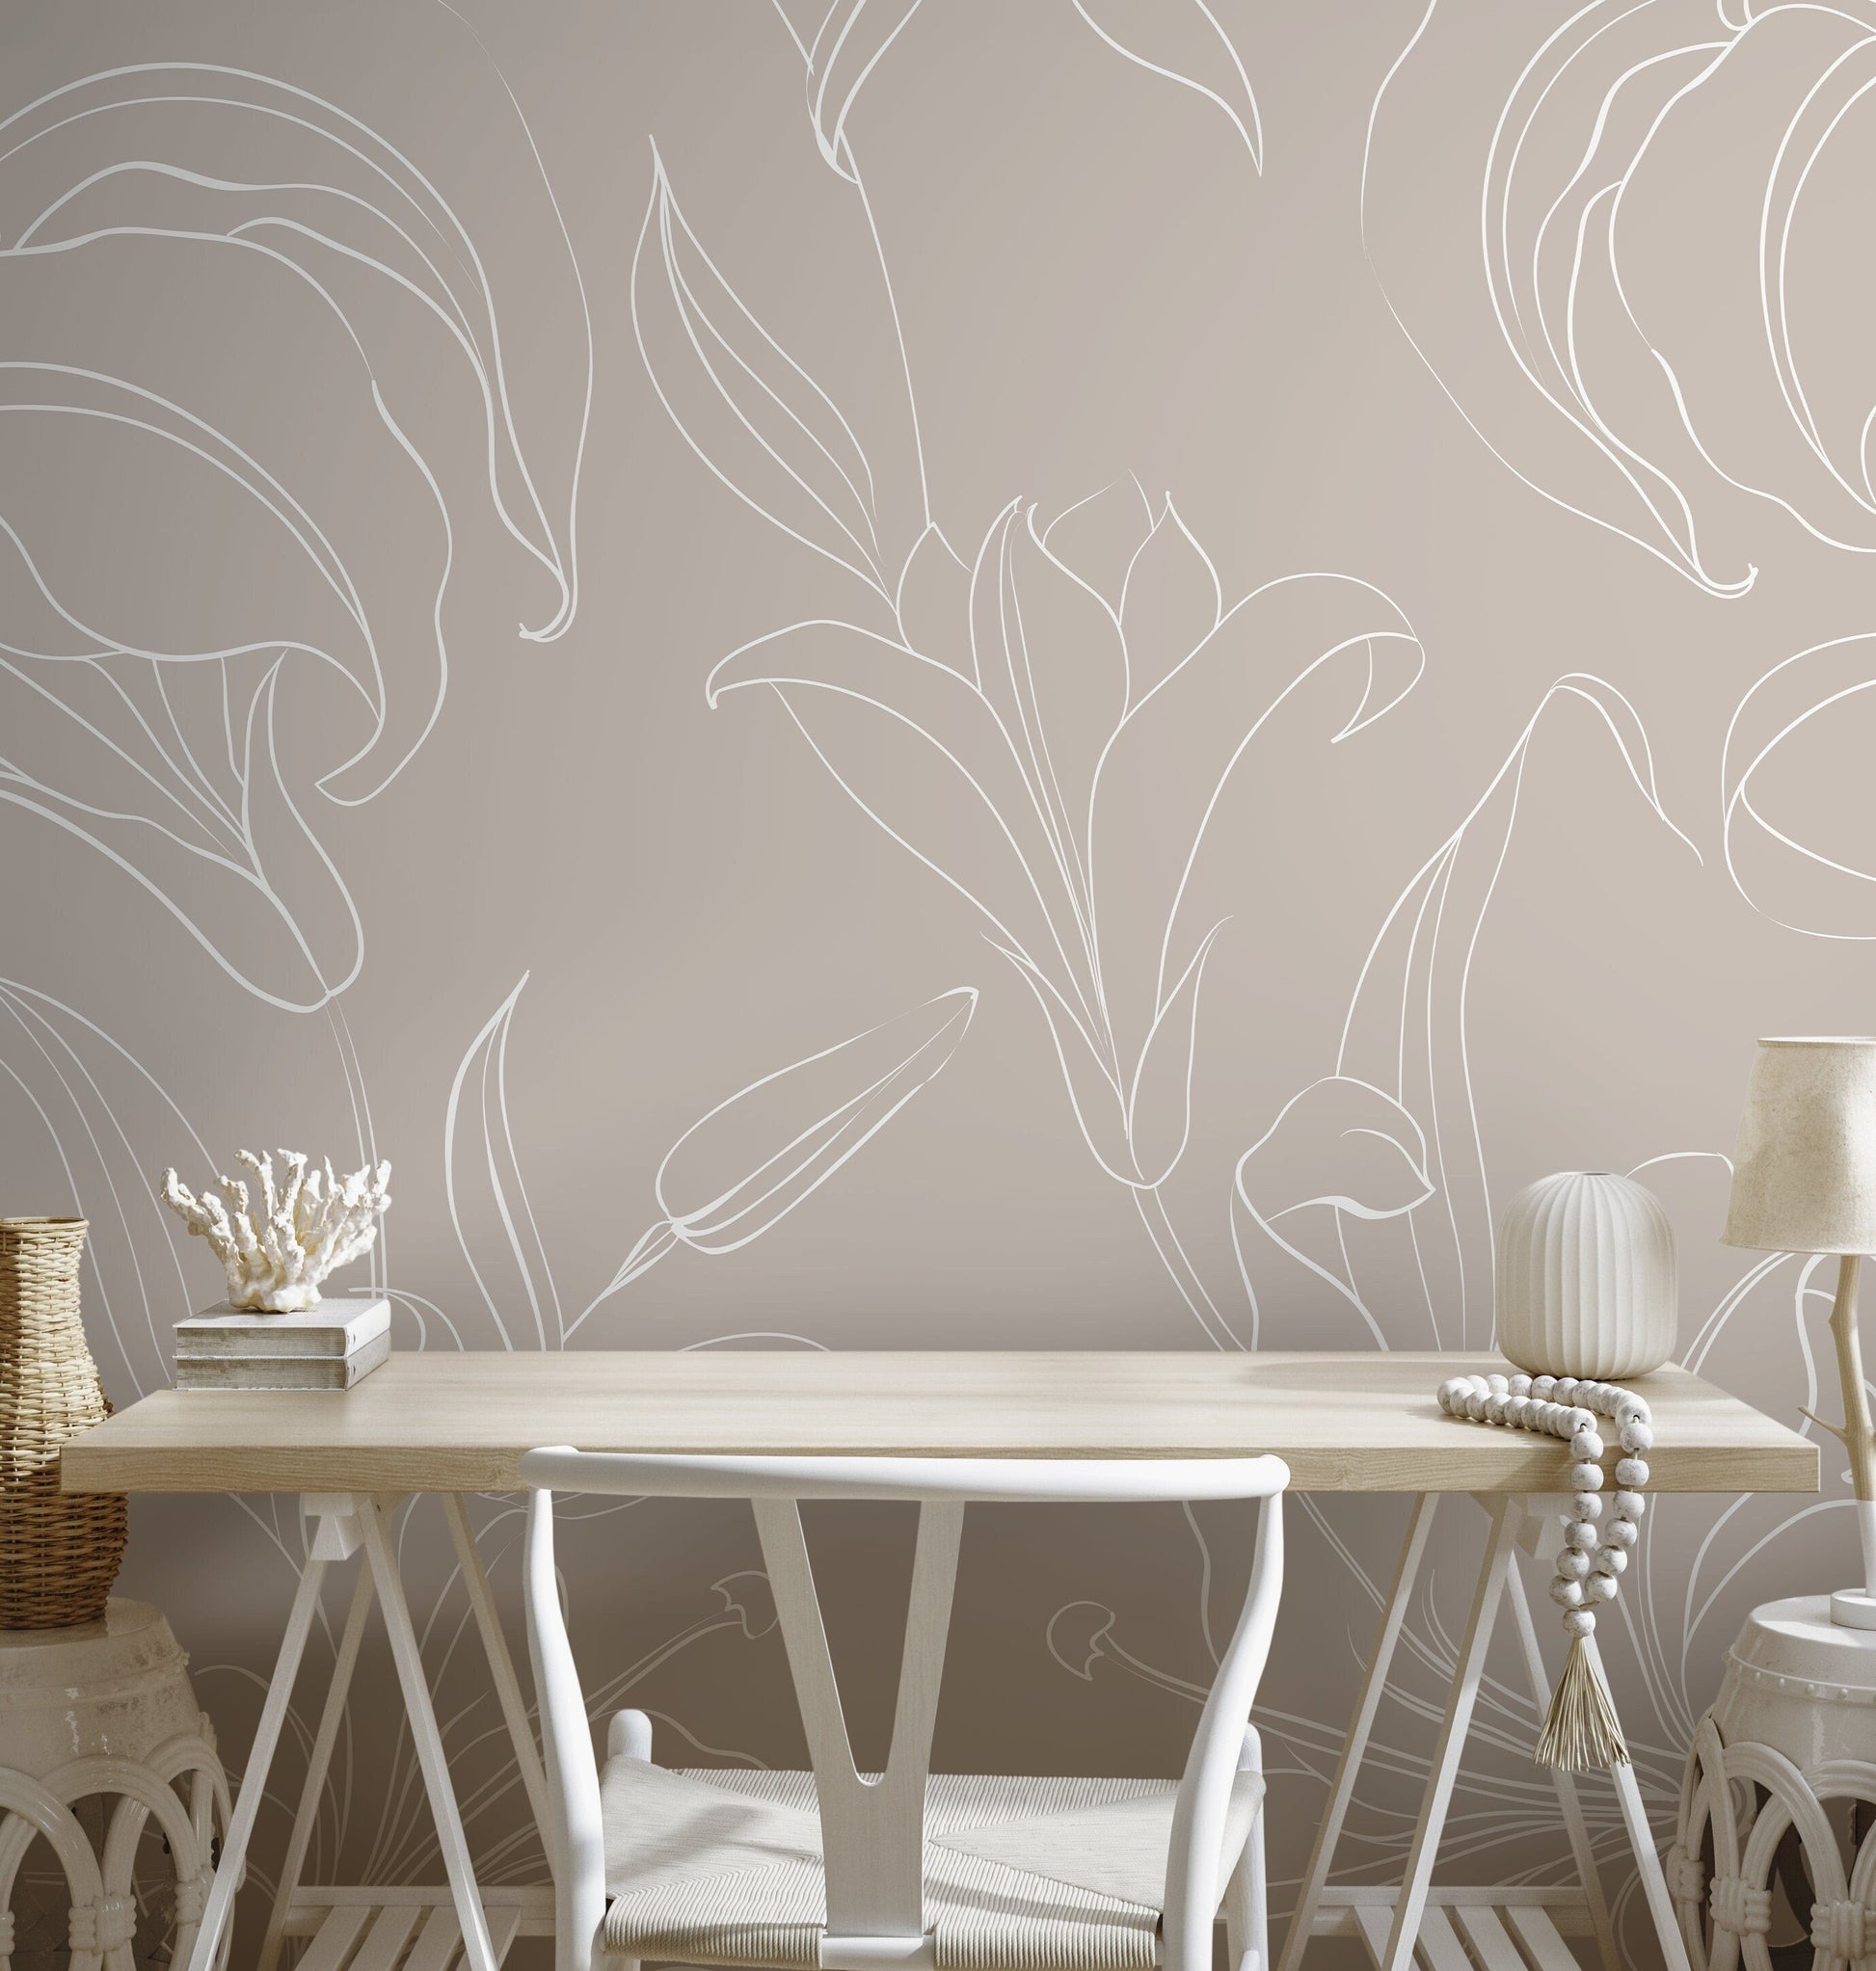 The Beige Minimalist Peony Mural Mural Self Adhesive Large Scale Wallpaper Peony Floral Traditional Pre-pasted or Peel and Stick - ZADQ